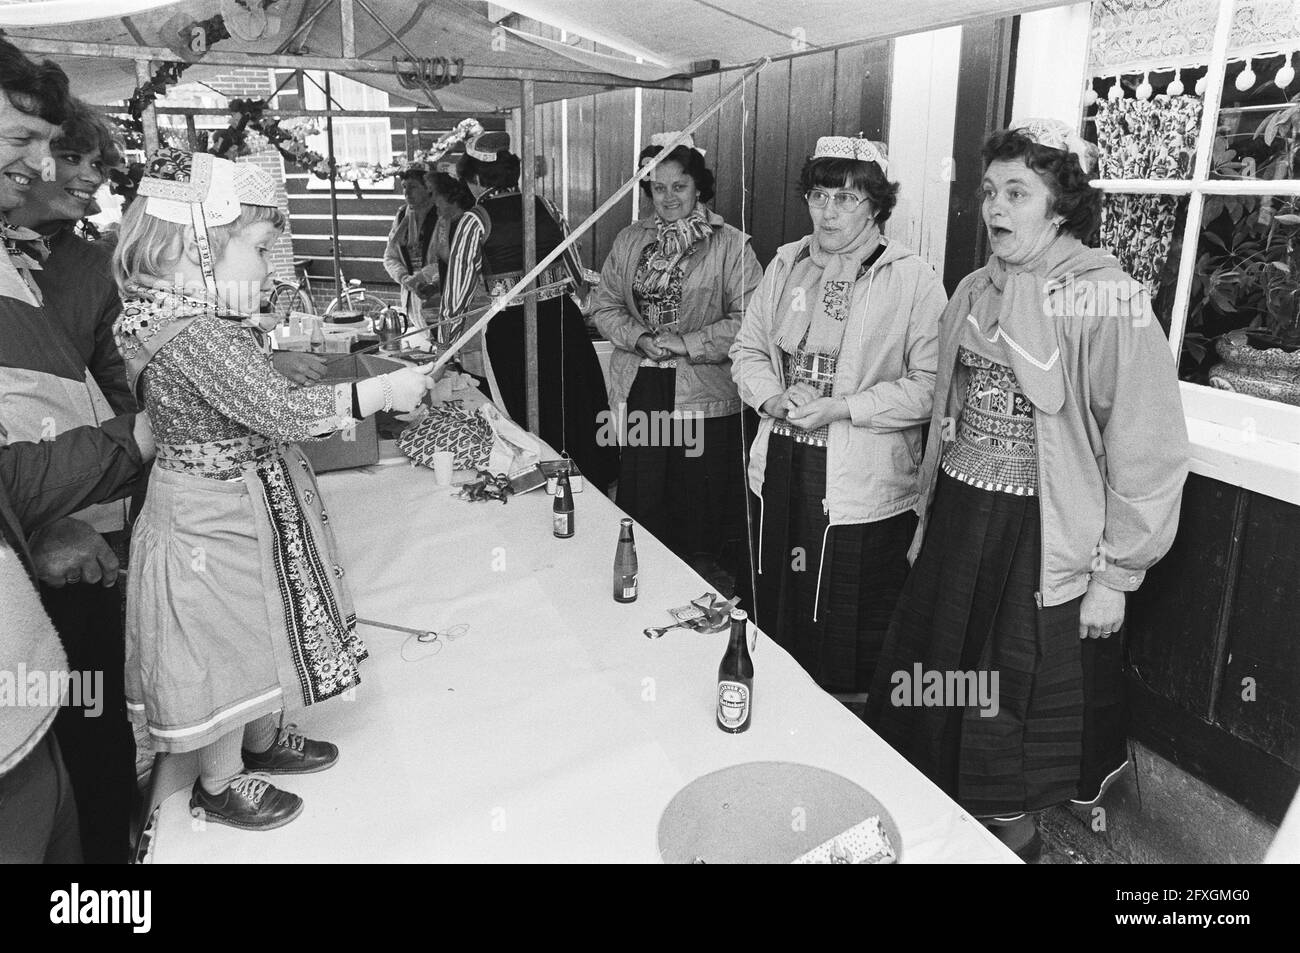 Celebrating Queen's Day in Amsterdam and Marken. Girl in traditional costume in Marken fishes for a bottle of drink, April 30, 1982, KONINGINNEDAG, The Netherlands, 20th century press agency photo, news to remember, documentary, historic photography 1945-1990, visual stories, human history of the Twentieth Century, capturing moments in time Stock Photo